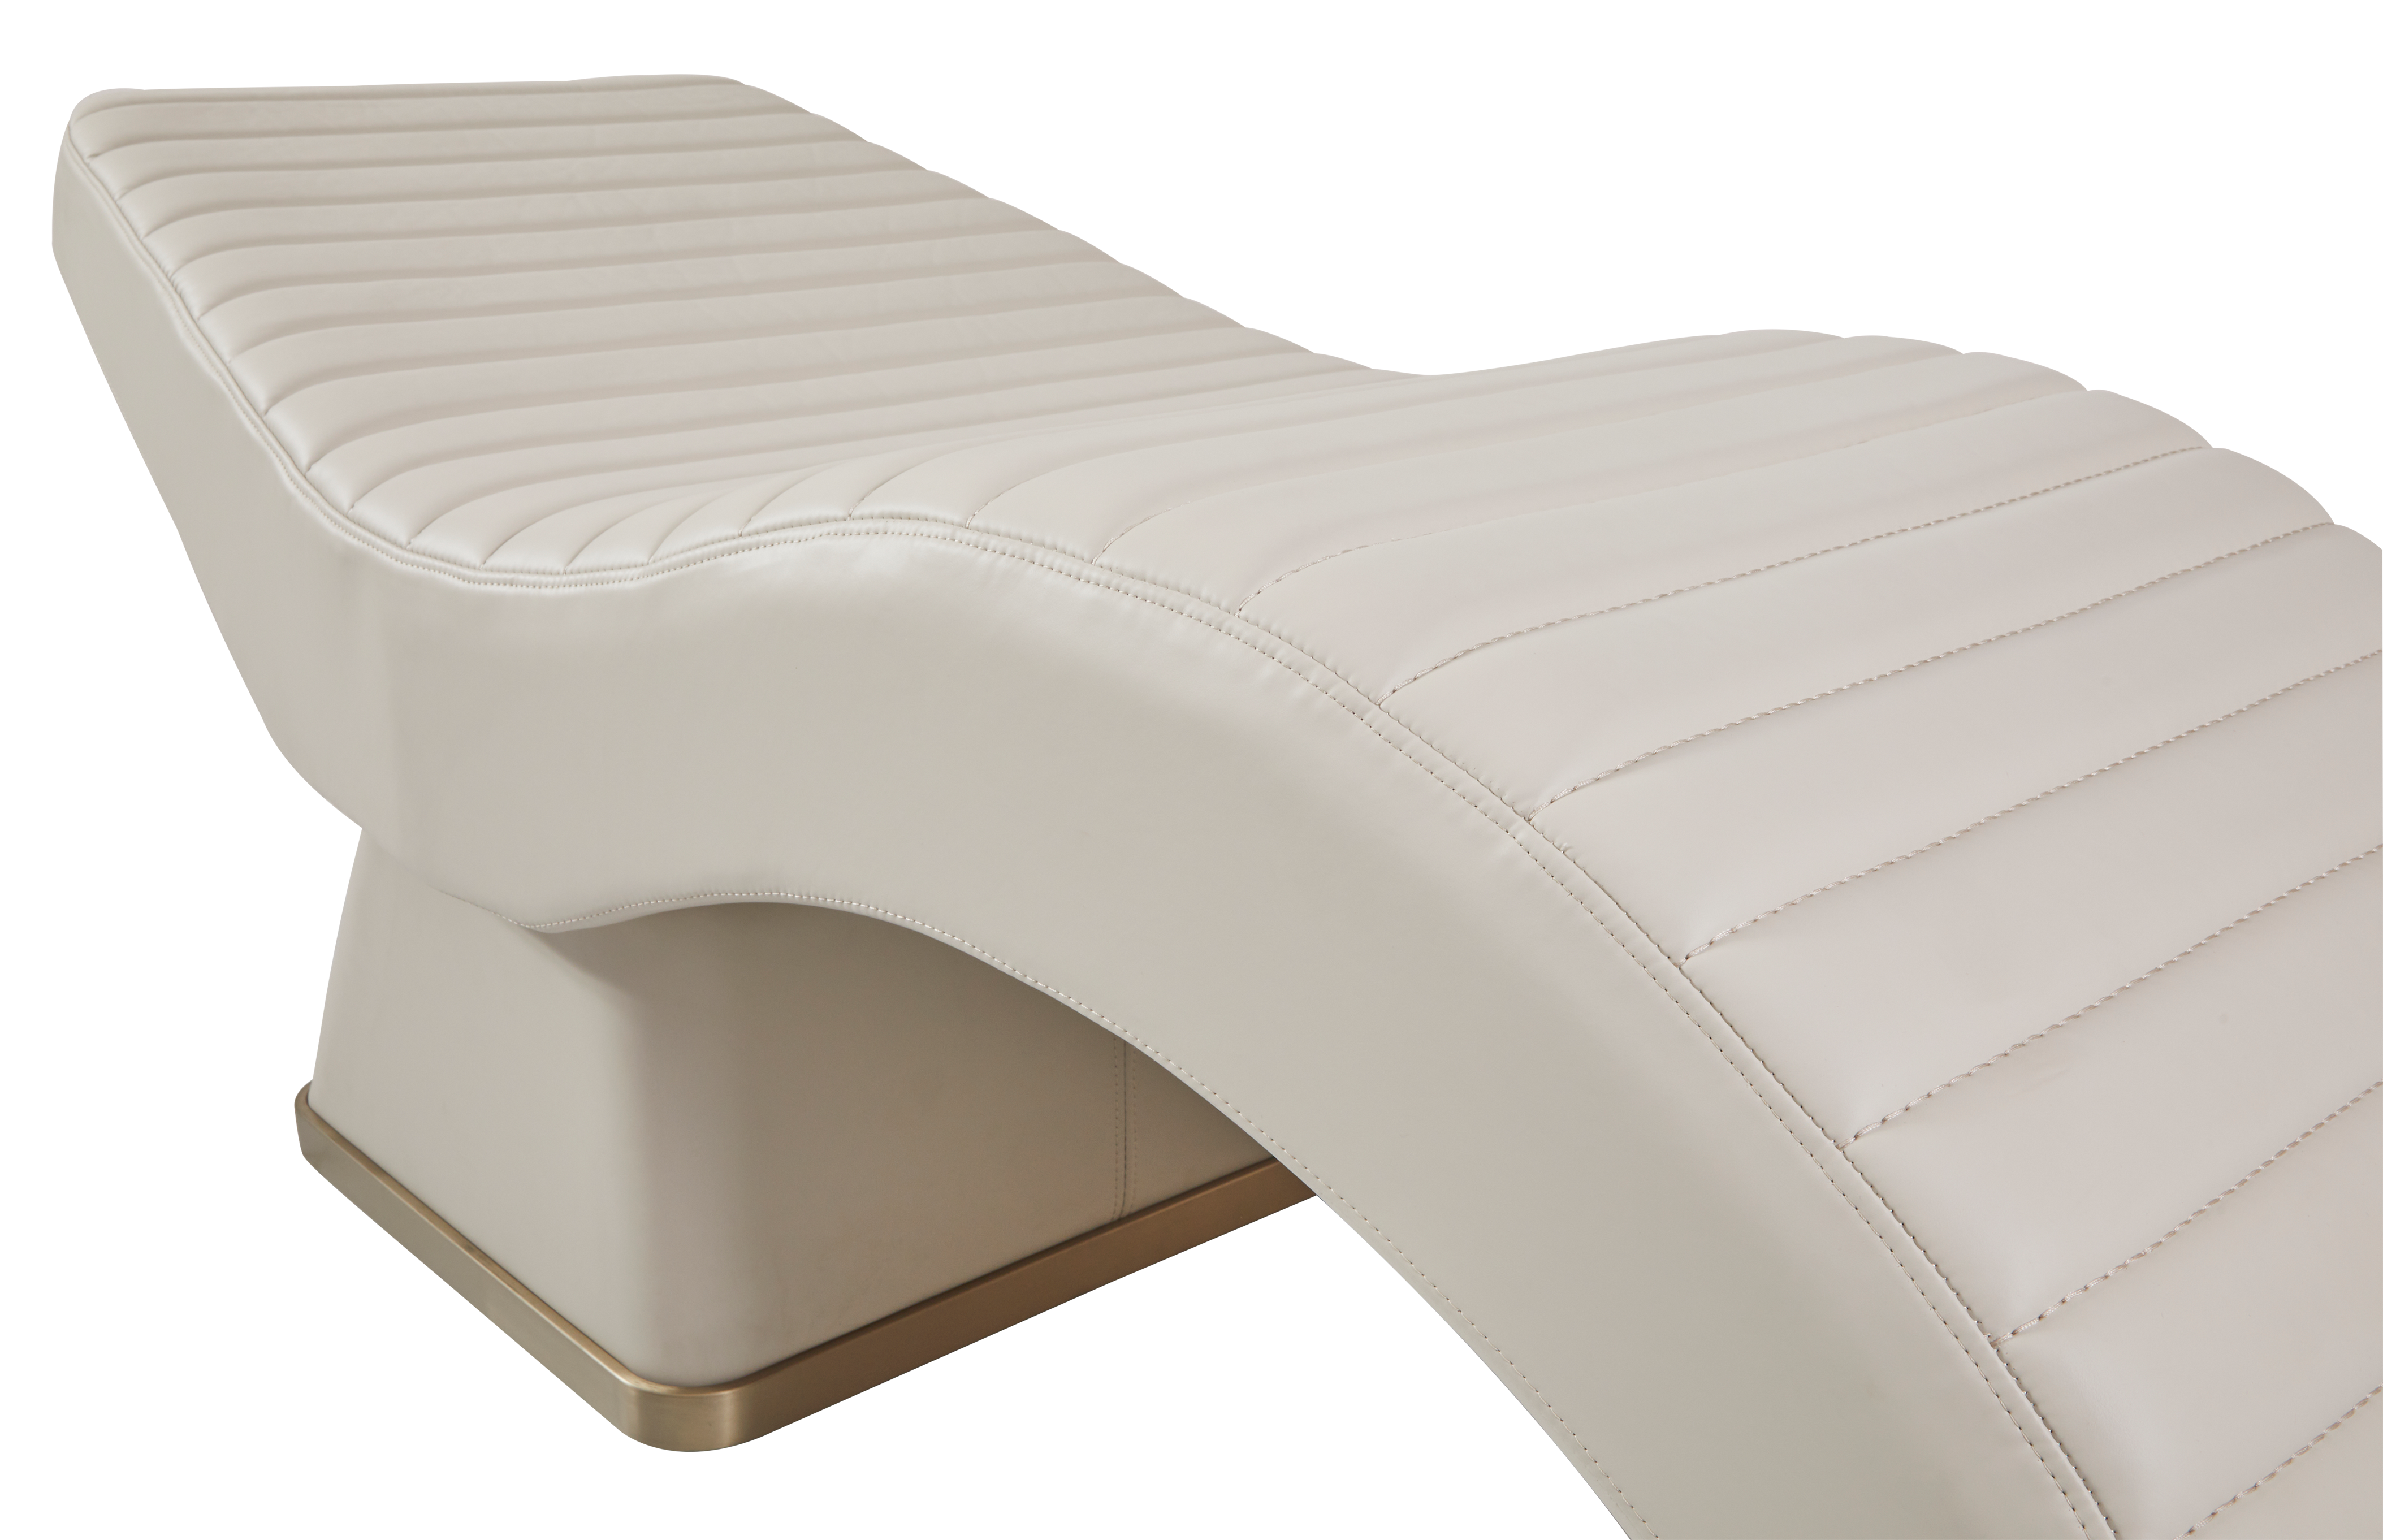 The Hourglass Lash Bed - Ivory & Champagne Gold with Stitching by SEC